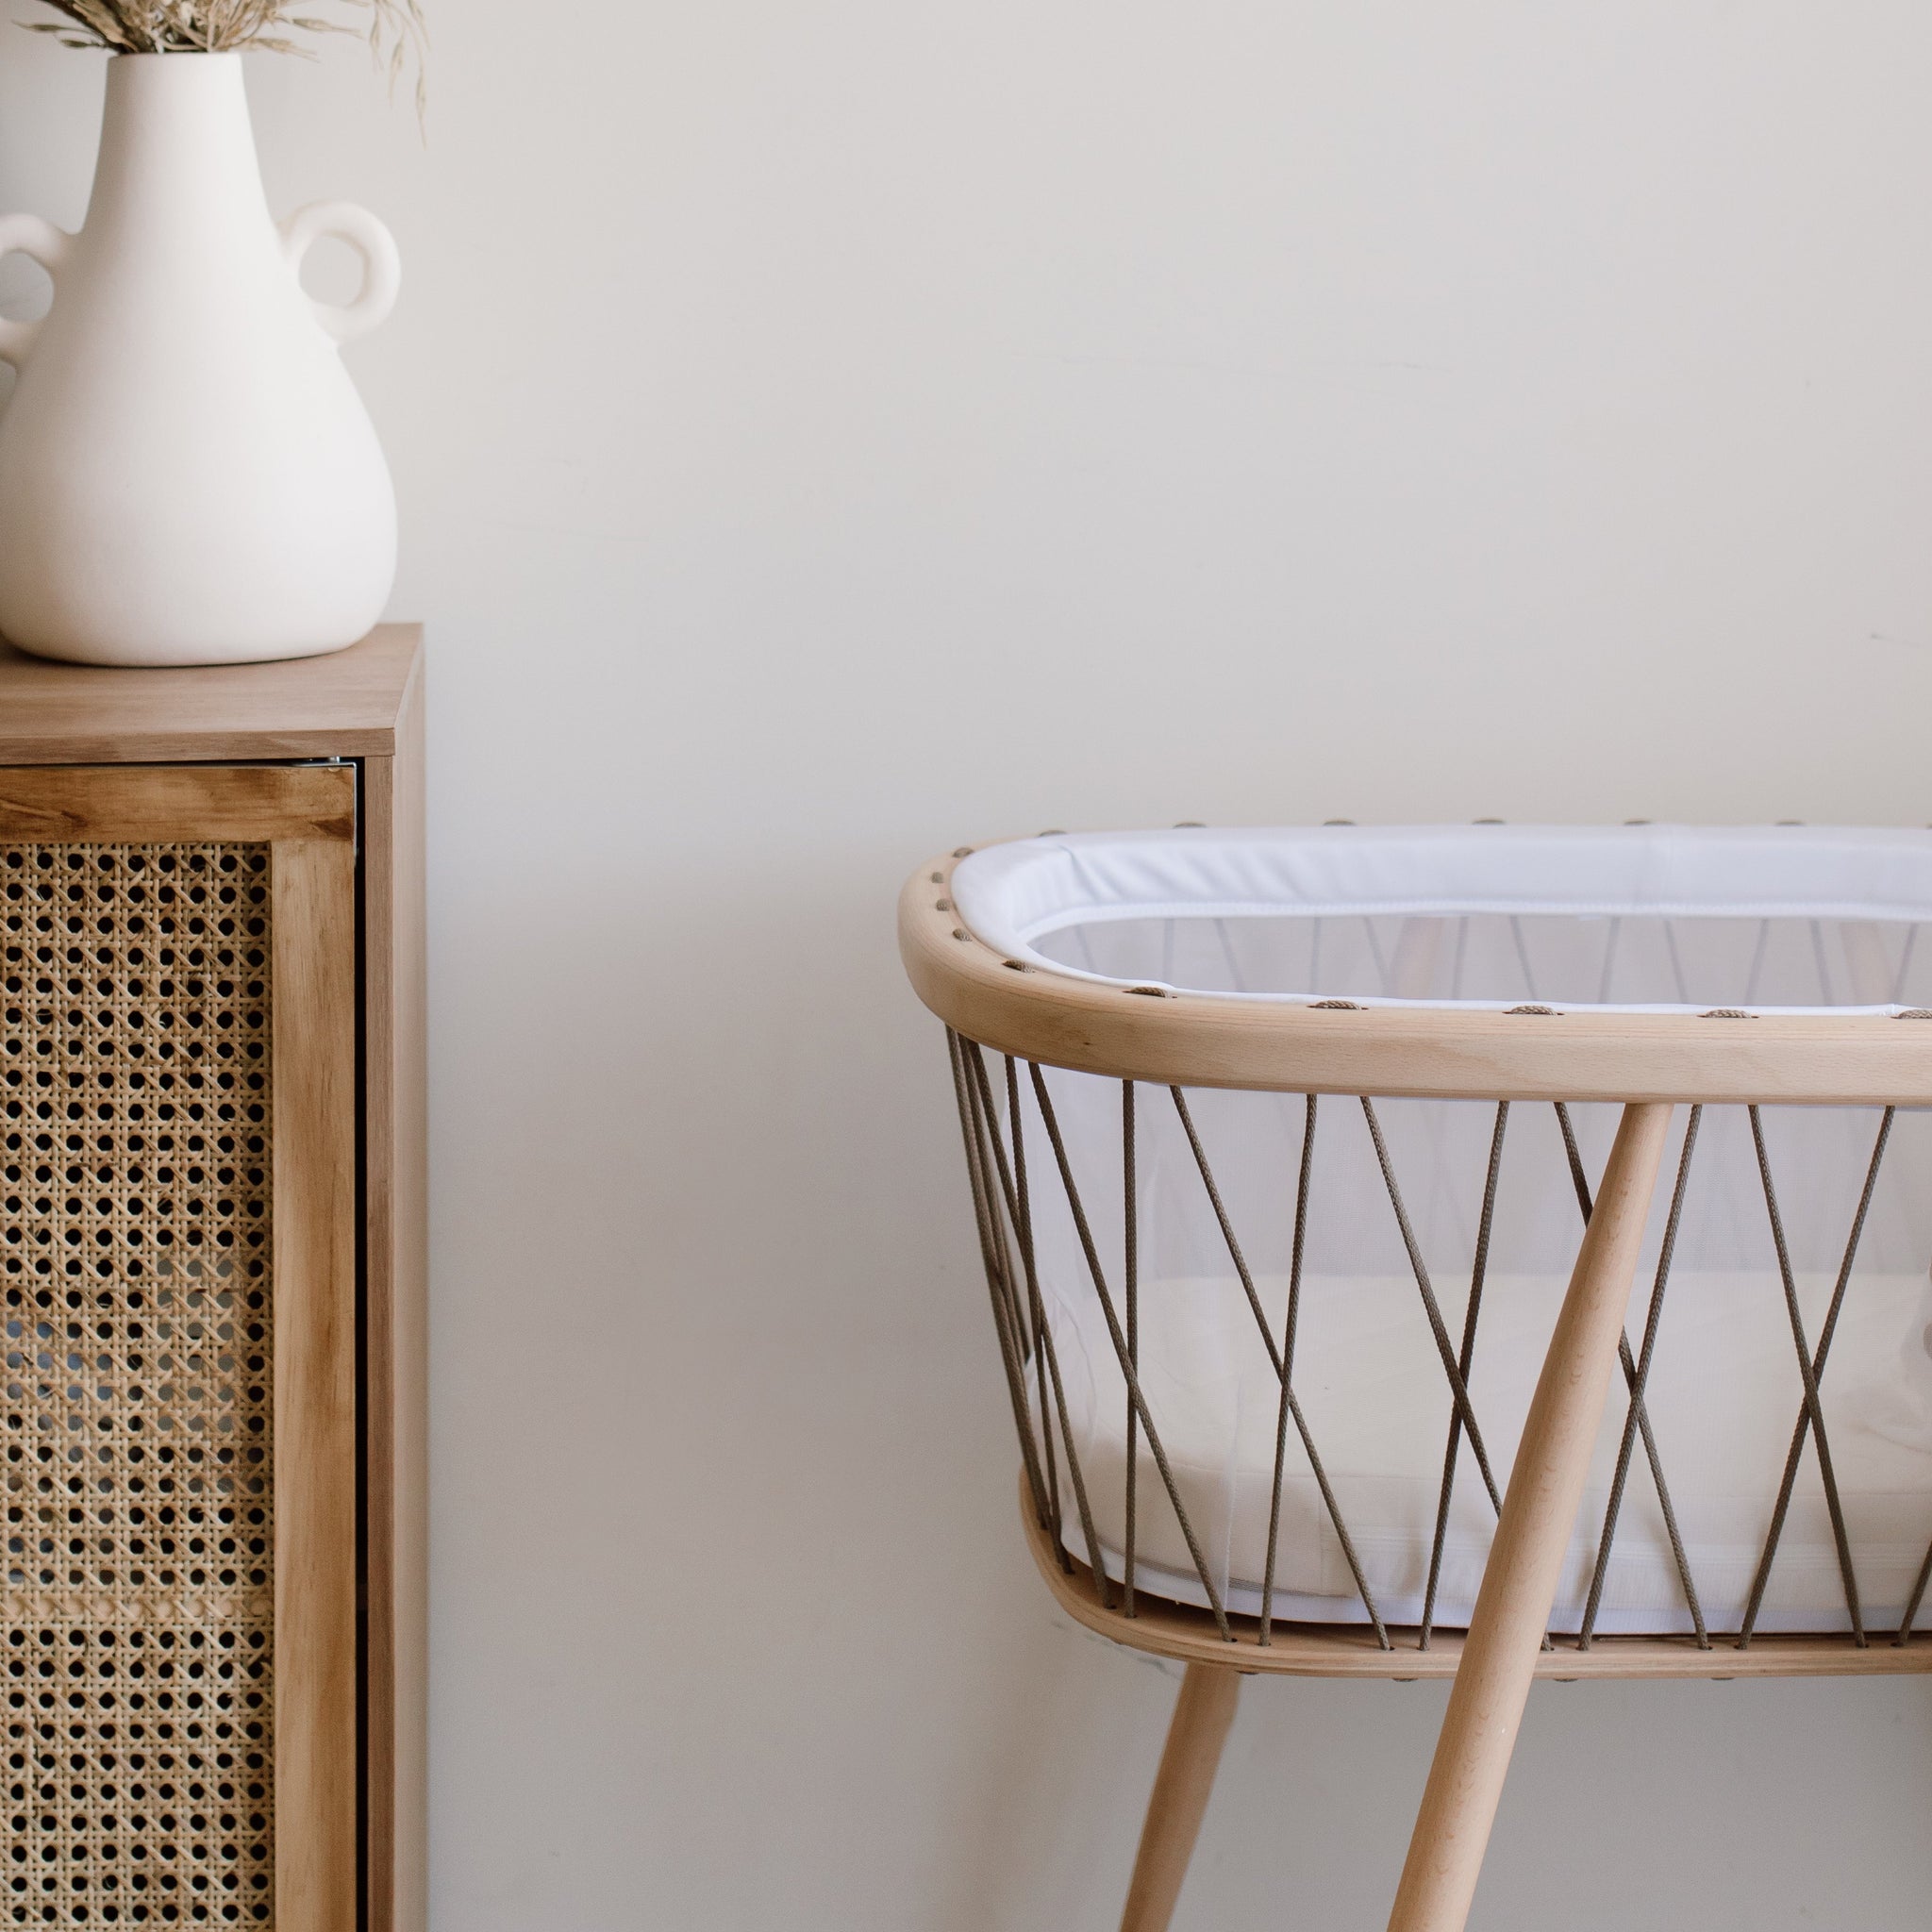 The design of the KUMI combines tradition and modernity. It retains the millenary lateral swing, a delicate movement that helps babies fall asleep, while sketching minimalist and contemporary lines, thanks in particular to the laces that surround it, which gives it both lightness and safety.